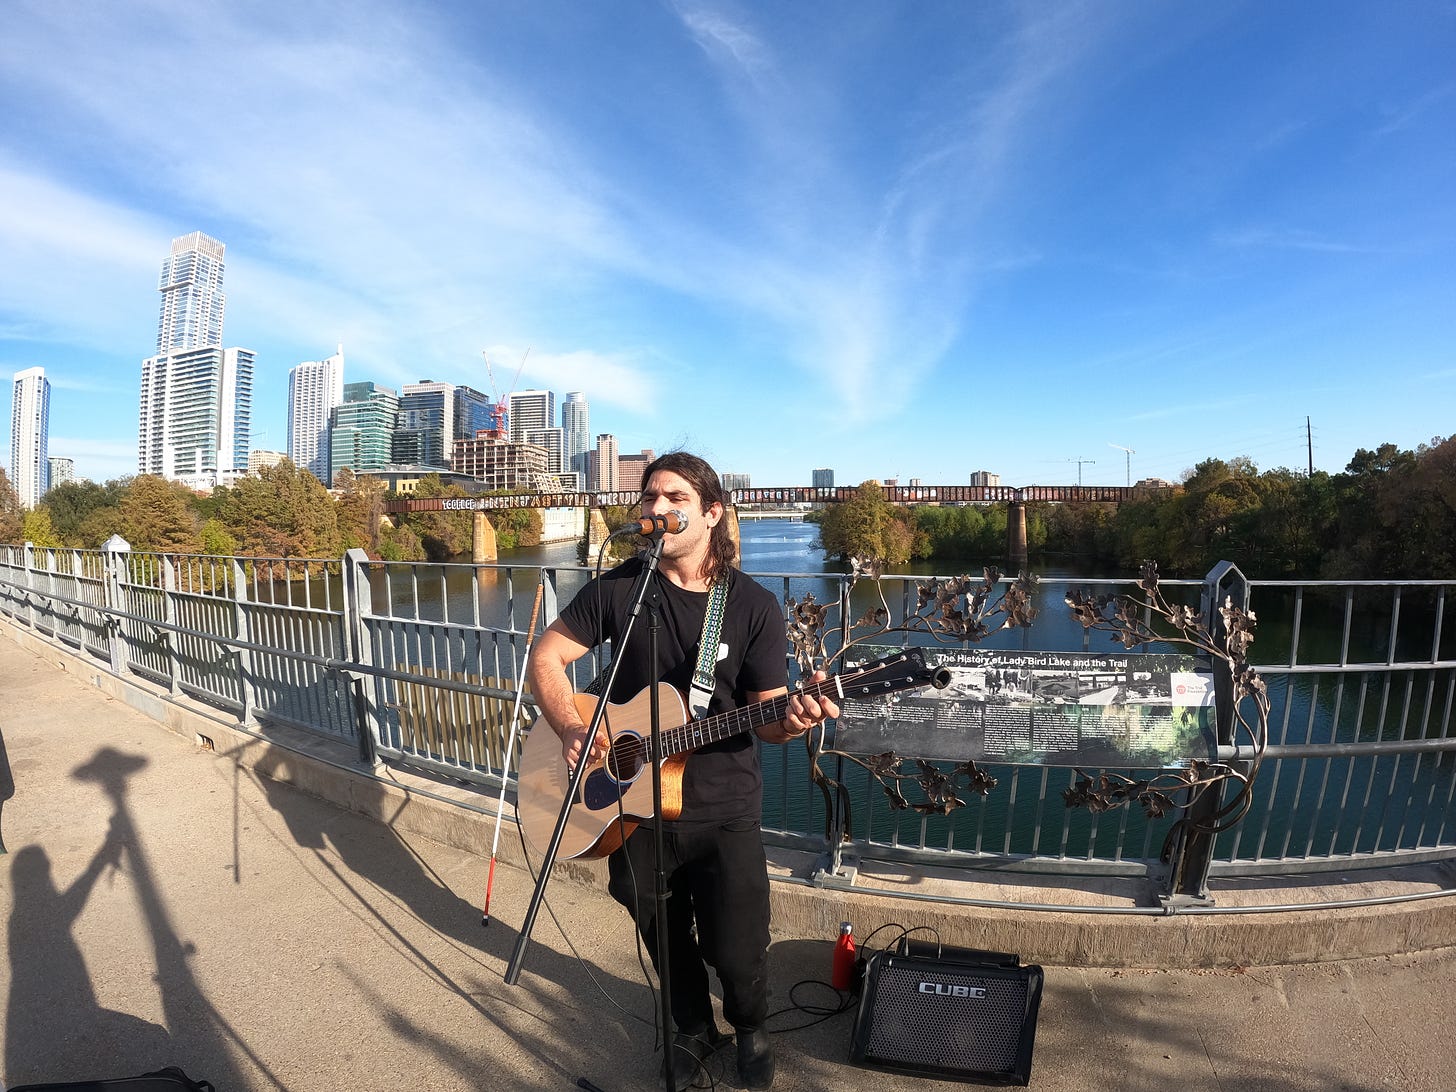 anthony standing on the bridge holding his guitar playing it with his white cane in the background and the city of austin texas in the background there is a river below him and the sky is blue and its nice and hot outside